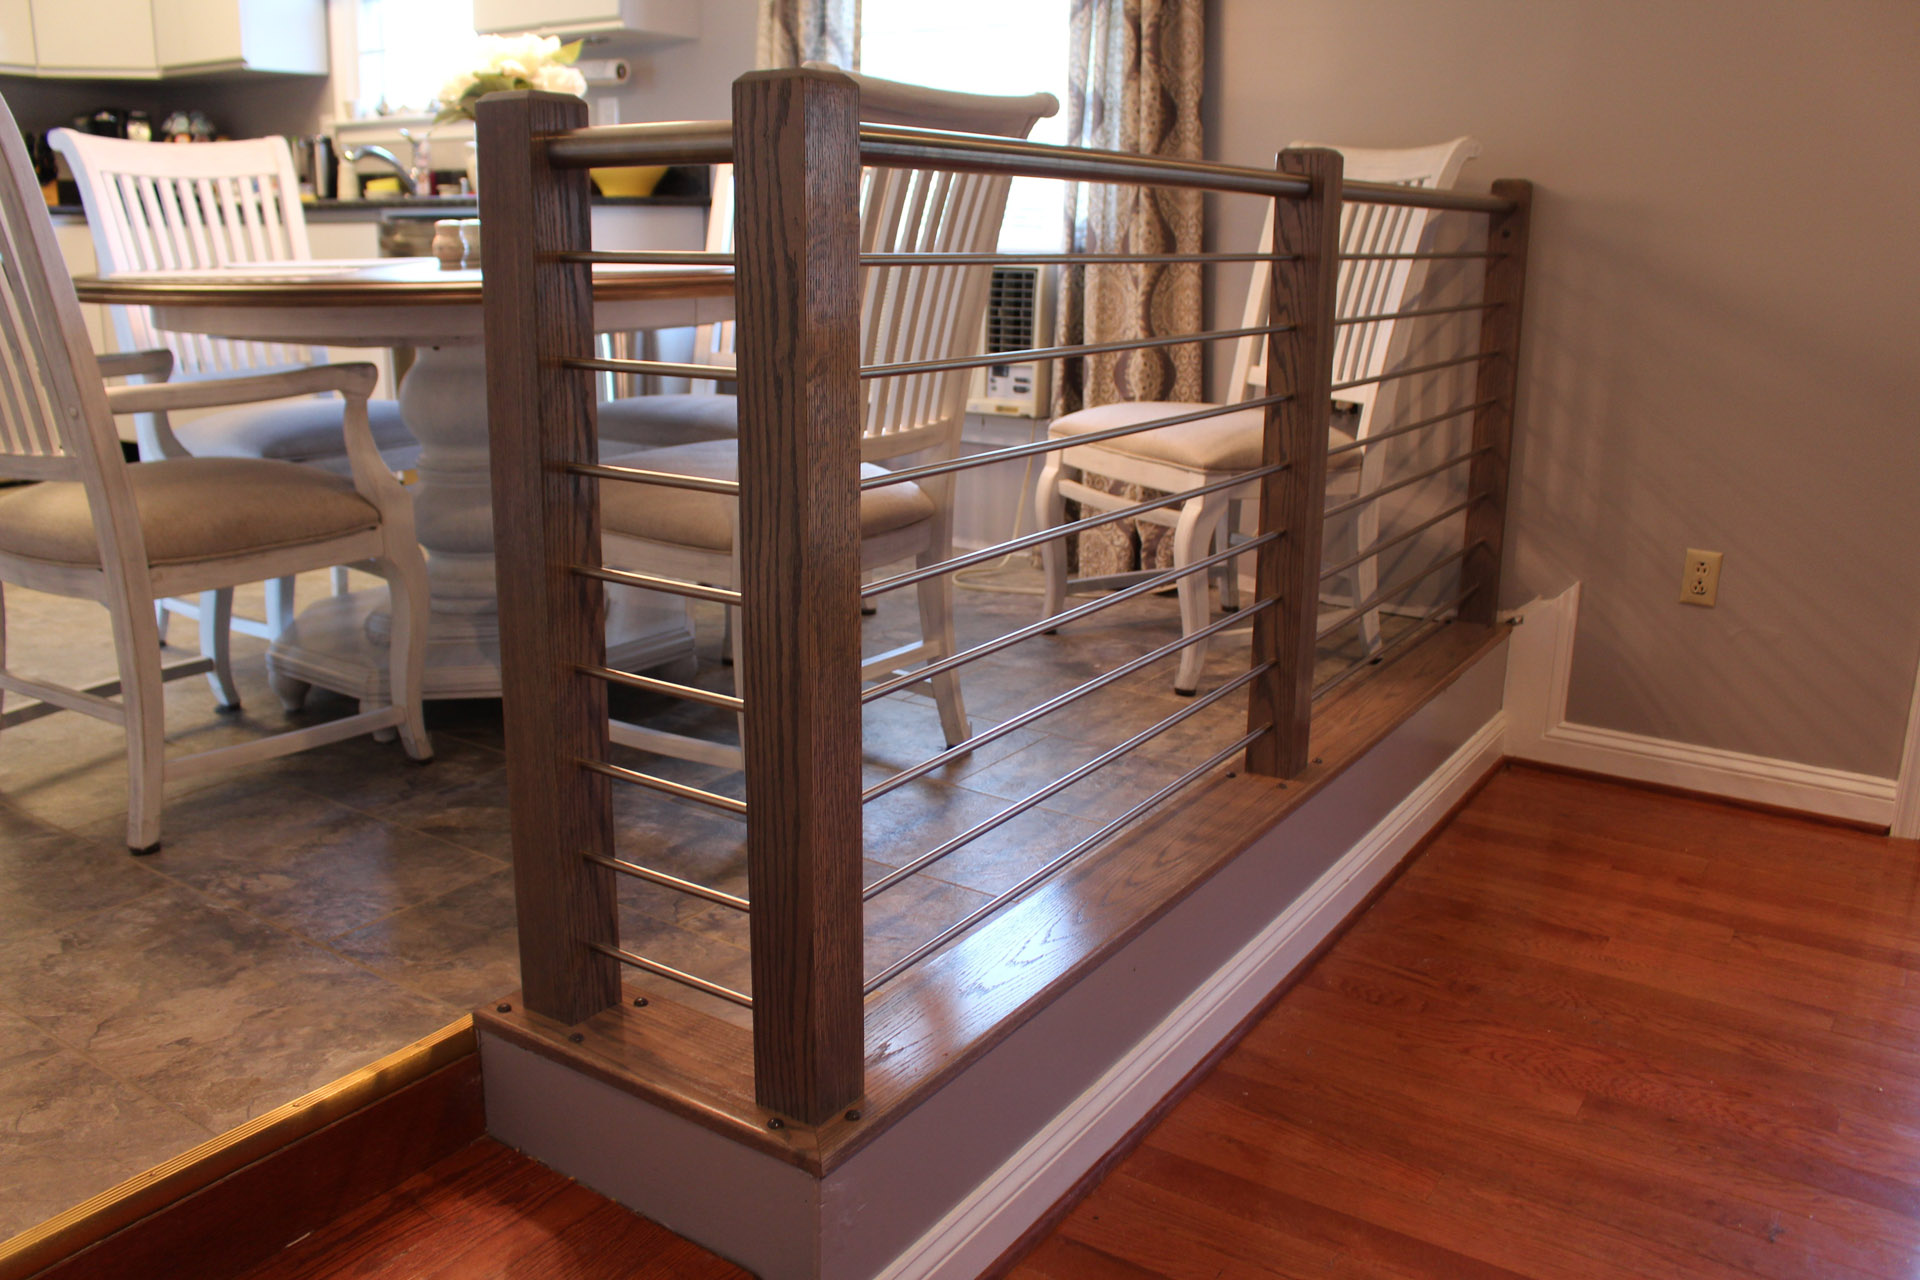 This showcases a completed loudoun stairs project within a home in northern virginia. This showcases the metal fabrication that loudoun stairs did in their shop. 